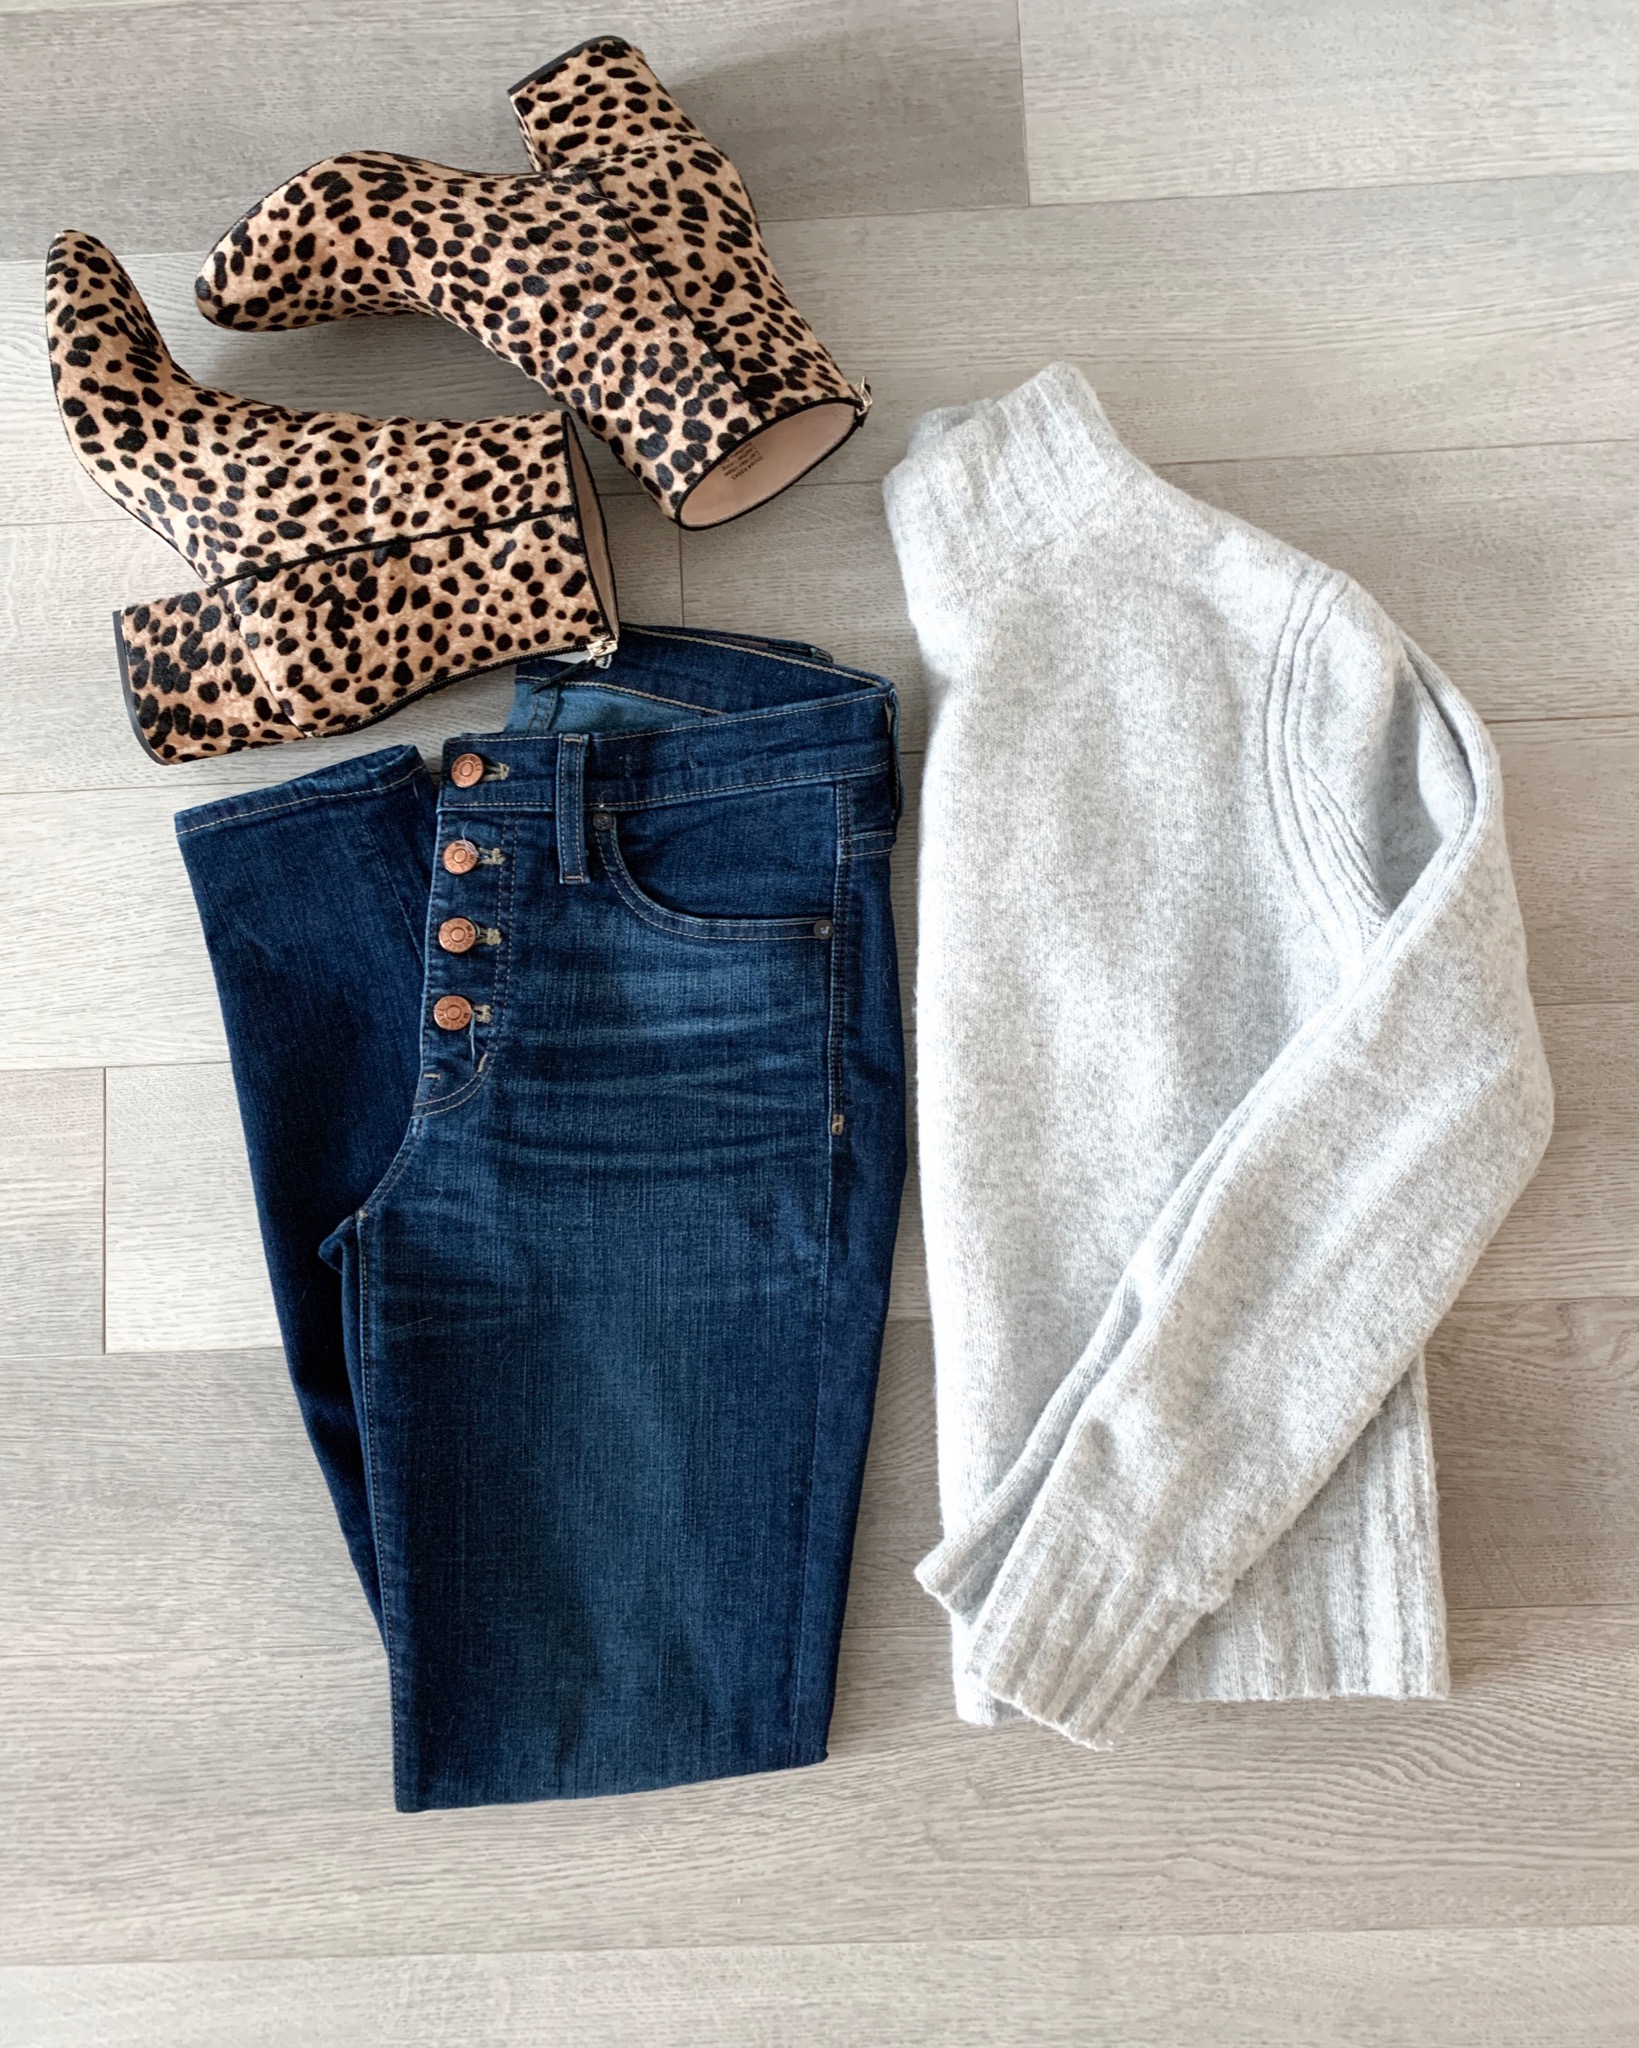 leopard booties for Fall 